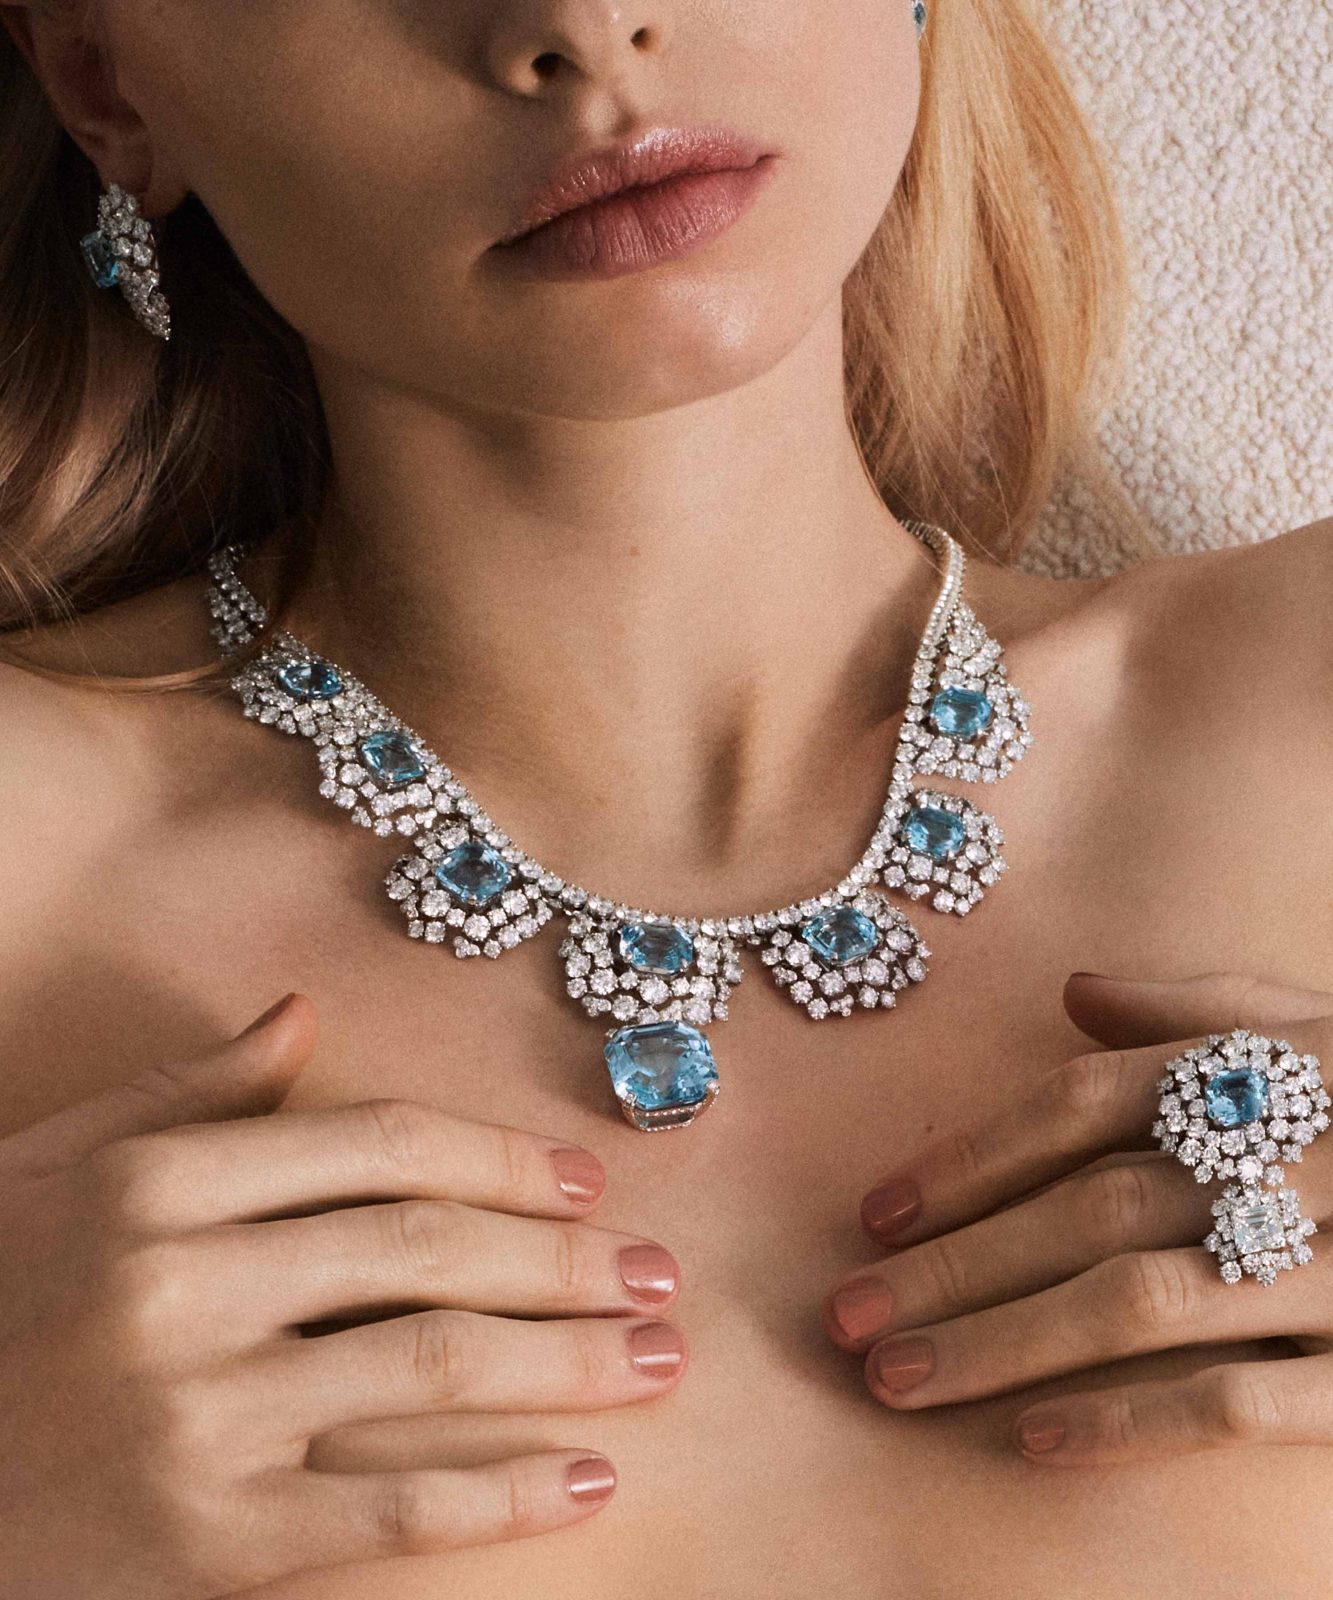 Haute Living's Exclusive Editorial Featuring Tiffany & Co.'s New High Jewelry Collection, BOTANICA: Blue Book 2022